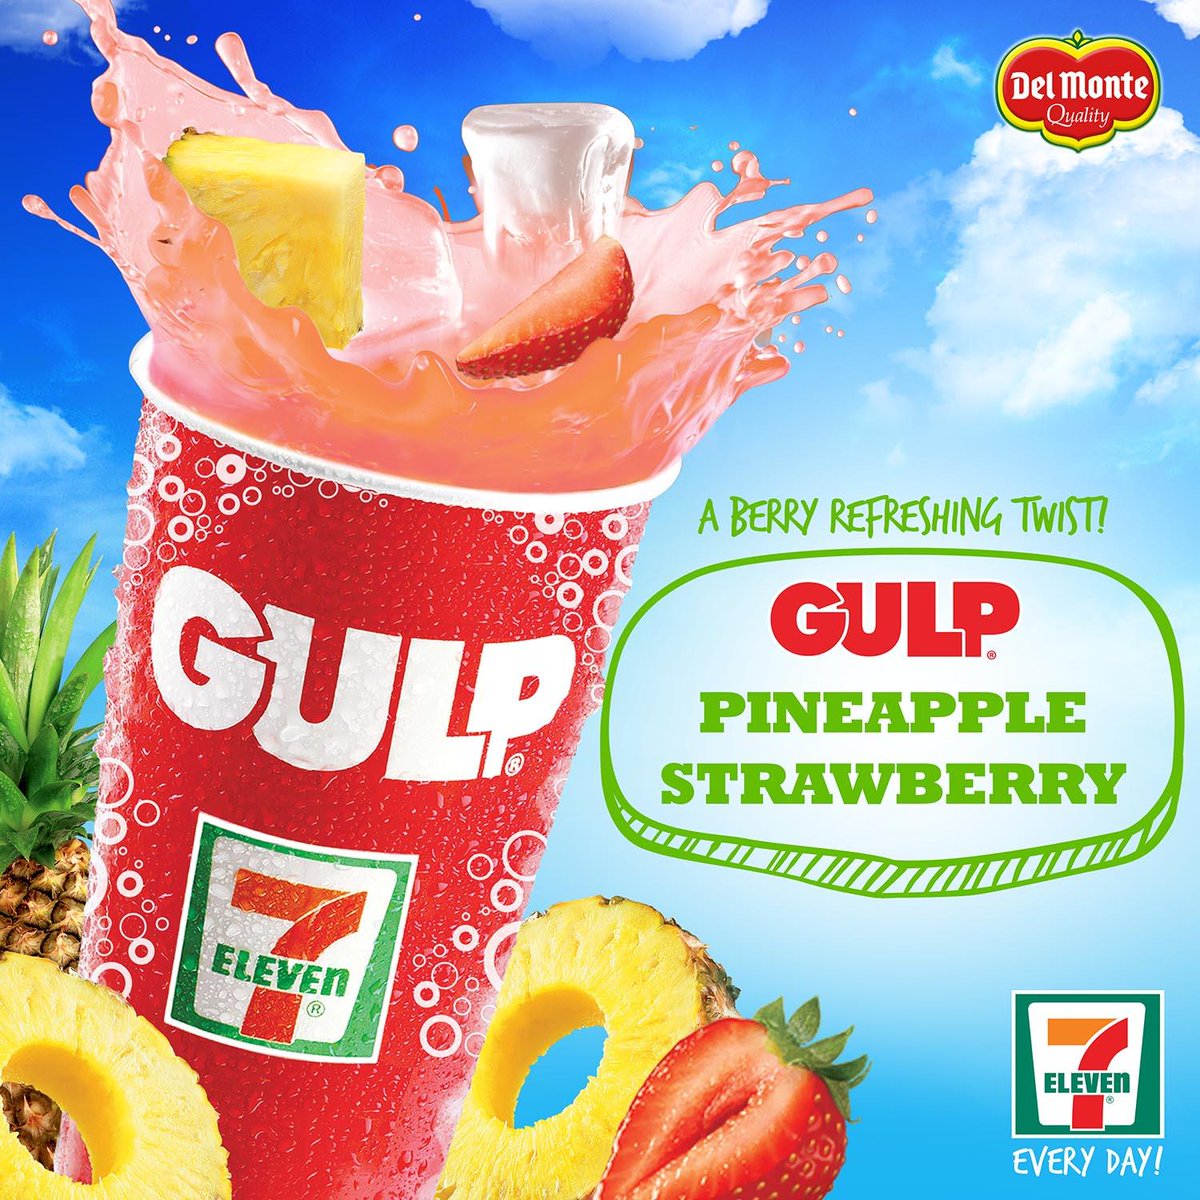 7-Eleven Philippines on X: Introducing the GULP Pineapple